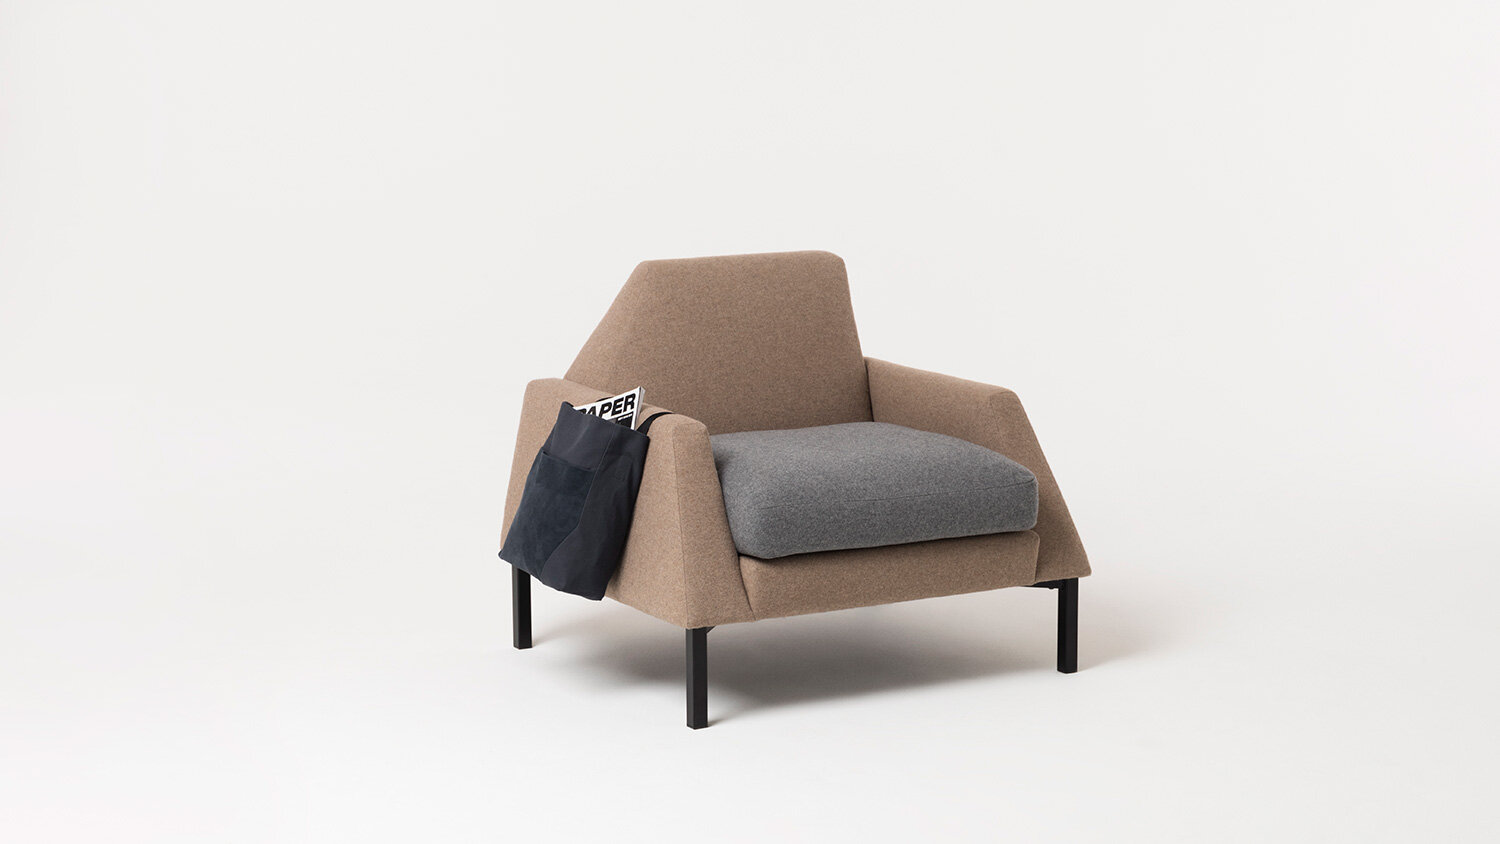 Armchair made within cyclic manufacturing